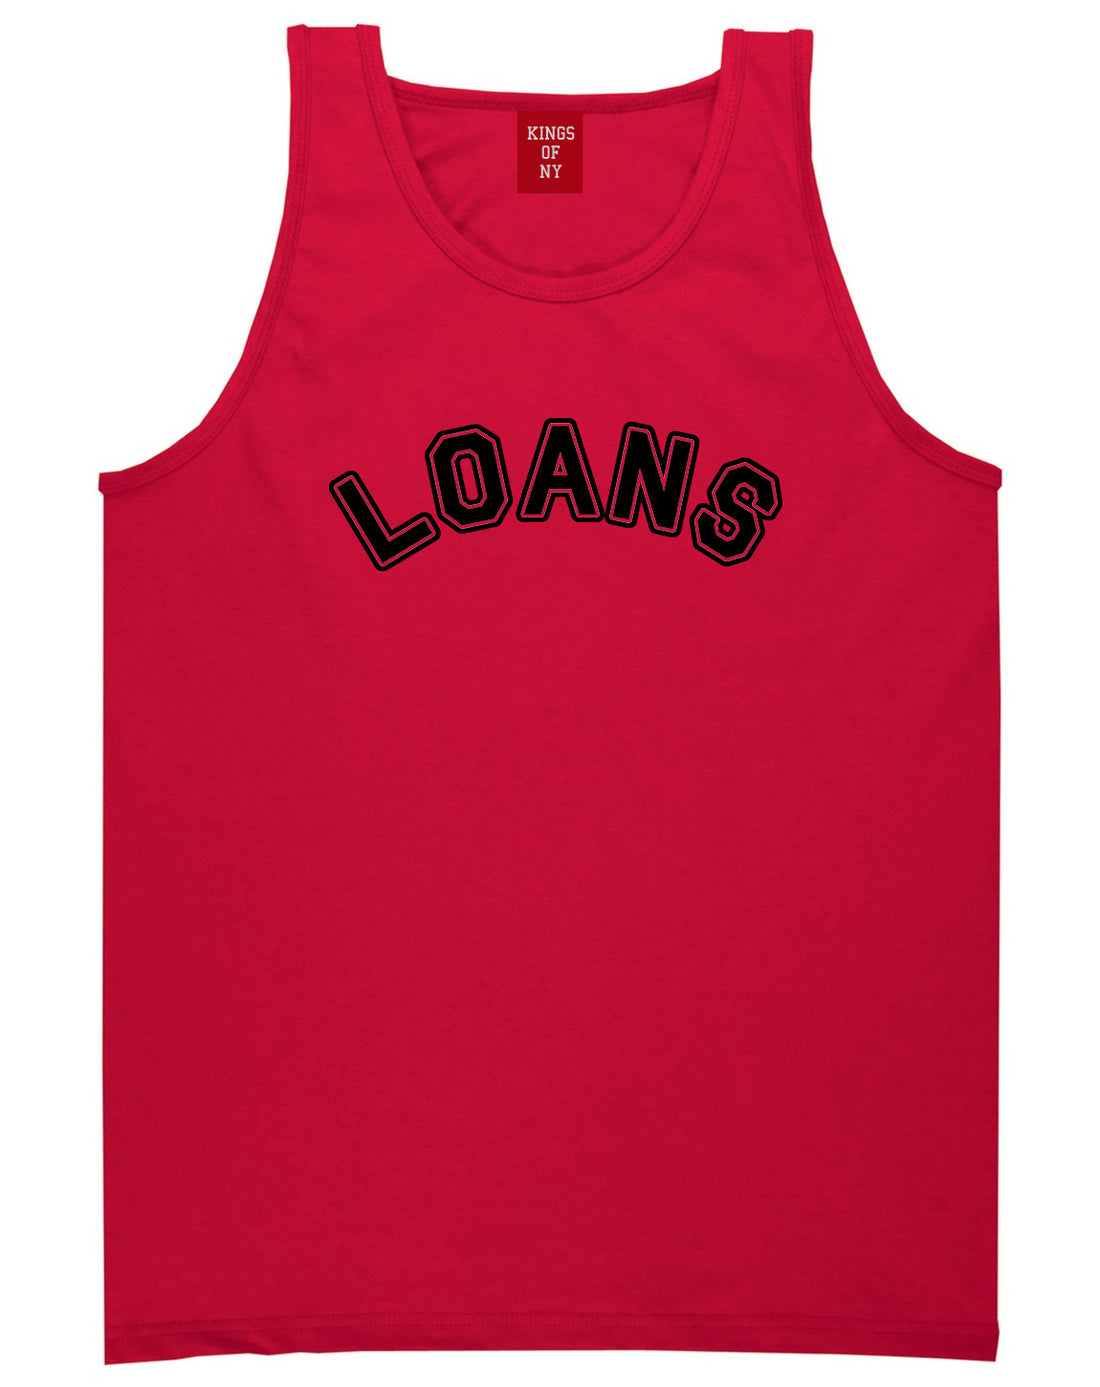 Student Loans College T-Shirt in Red